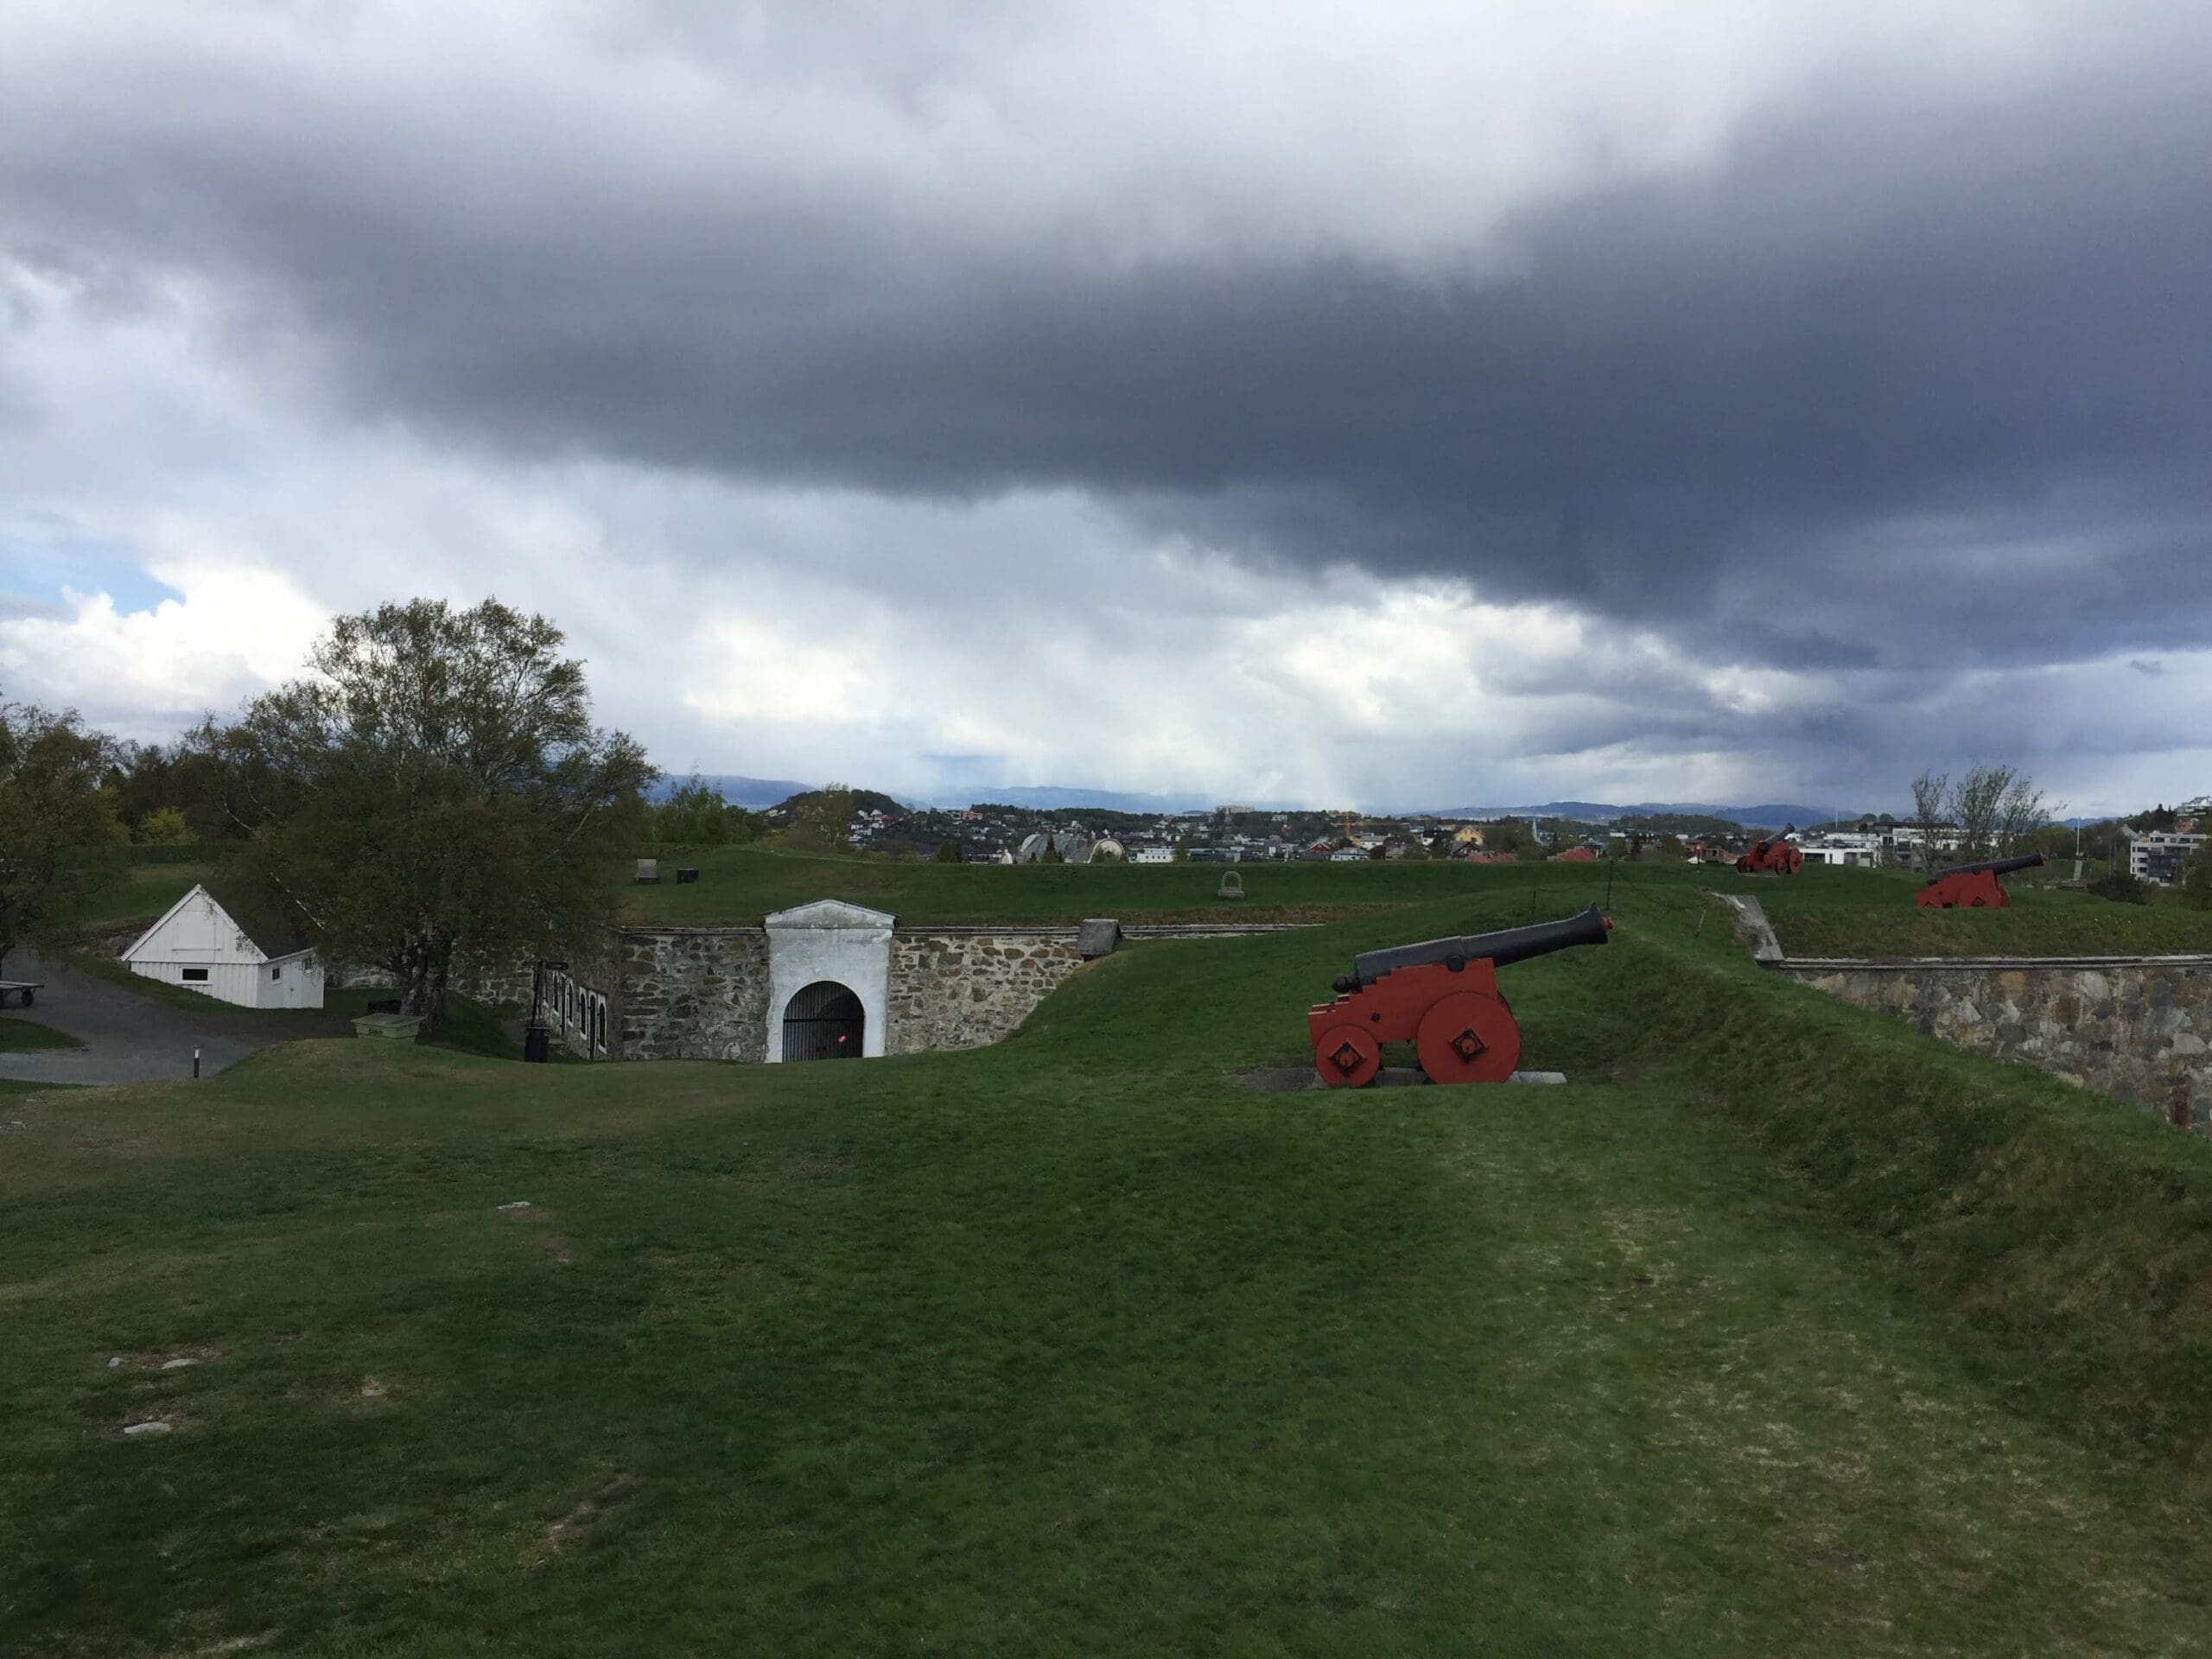 Sweeping views of the City below from Kristiansten Fortress - 3 Days in Trondheim Norway